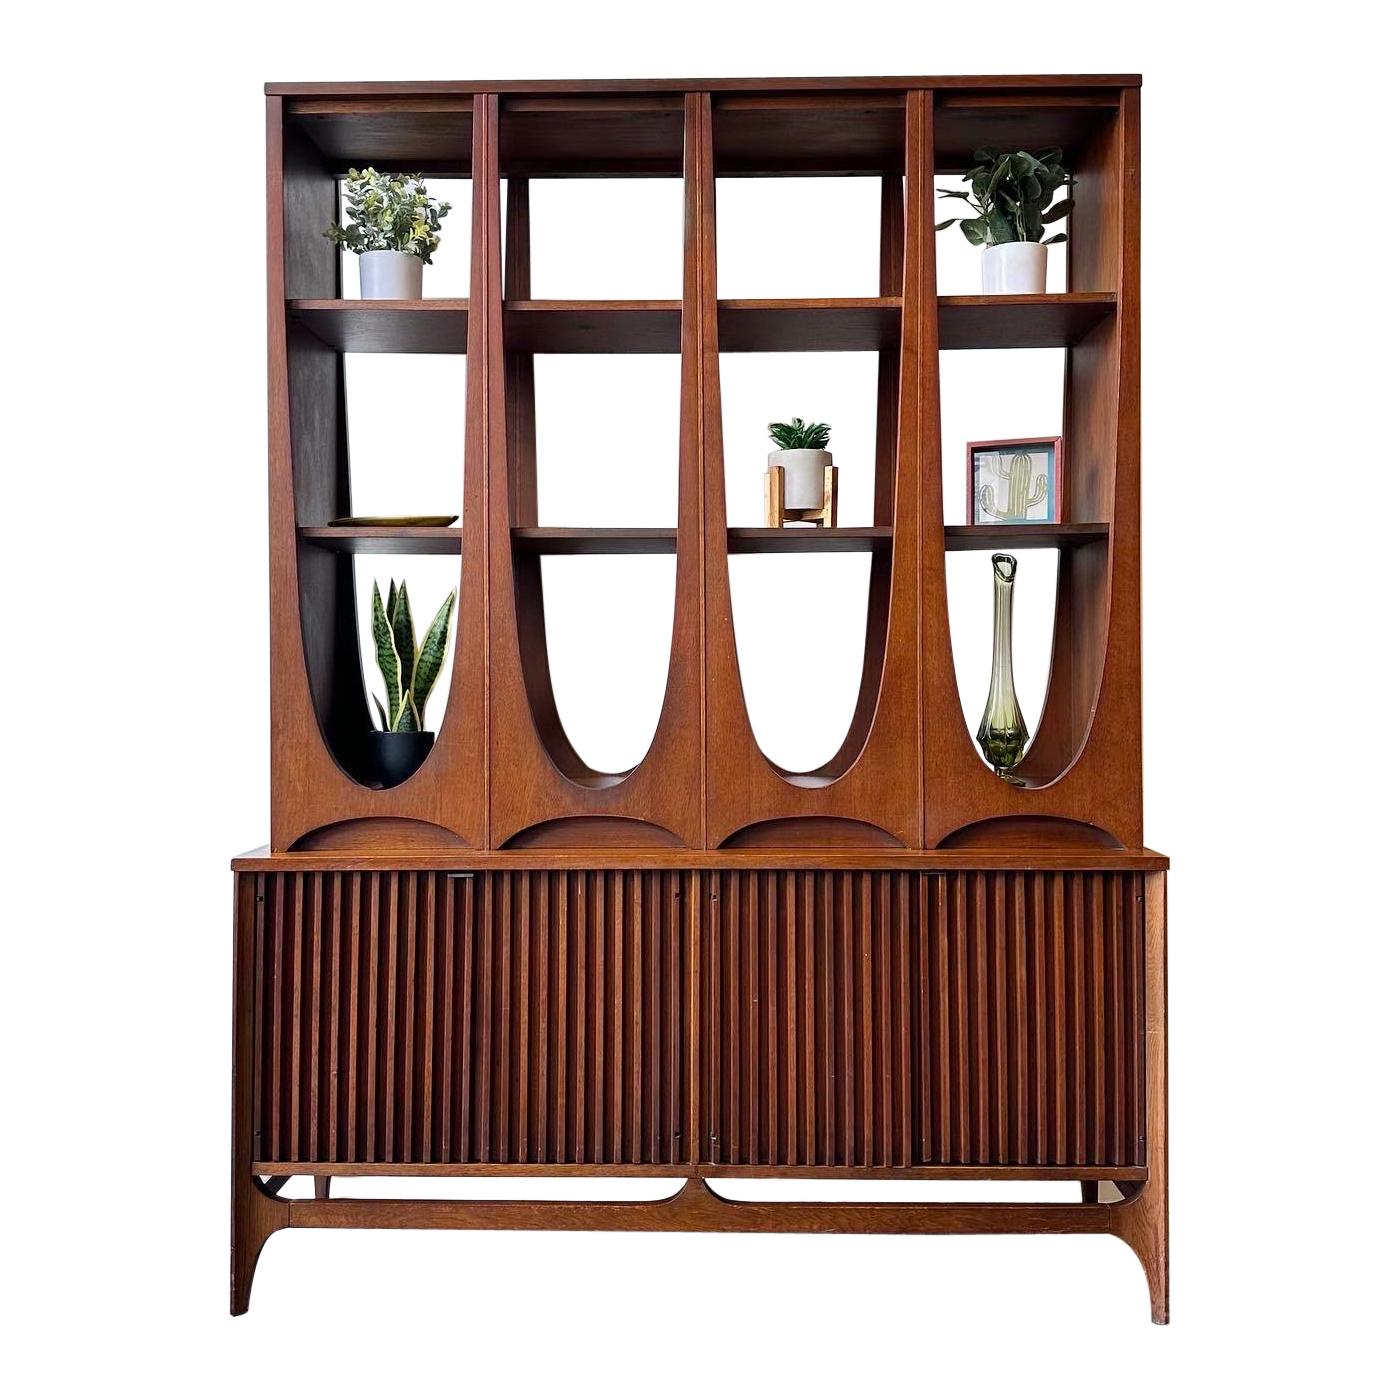 Highly coveted Room divider from the Broyhill Brasilia series designer Oscar Niemeyer circa 1960.

This fantastic walnut two piece unit is in great original condition with some signs of age appropriate wear ( see all pics )
Mostly scratches